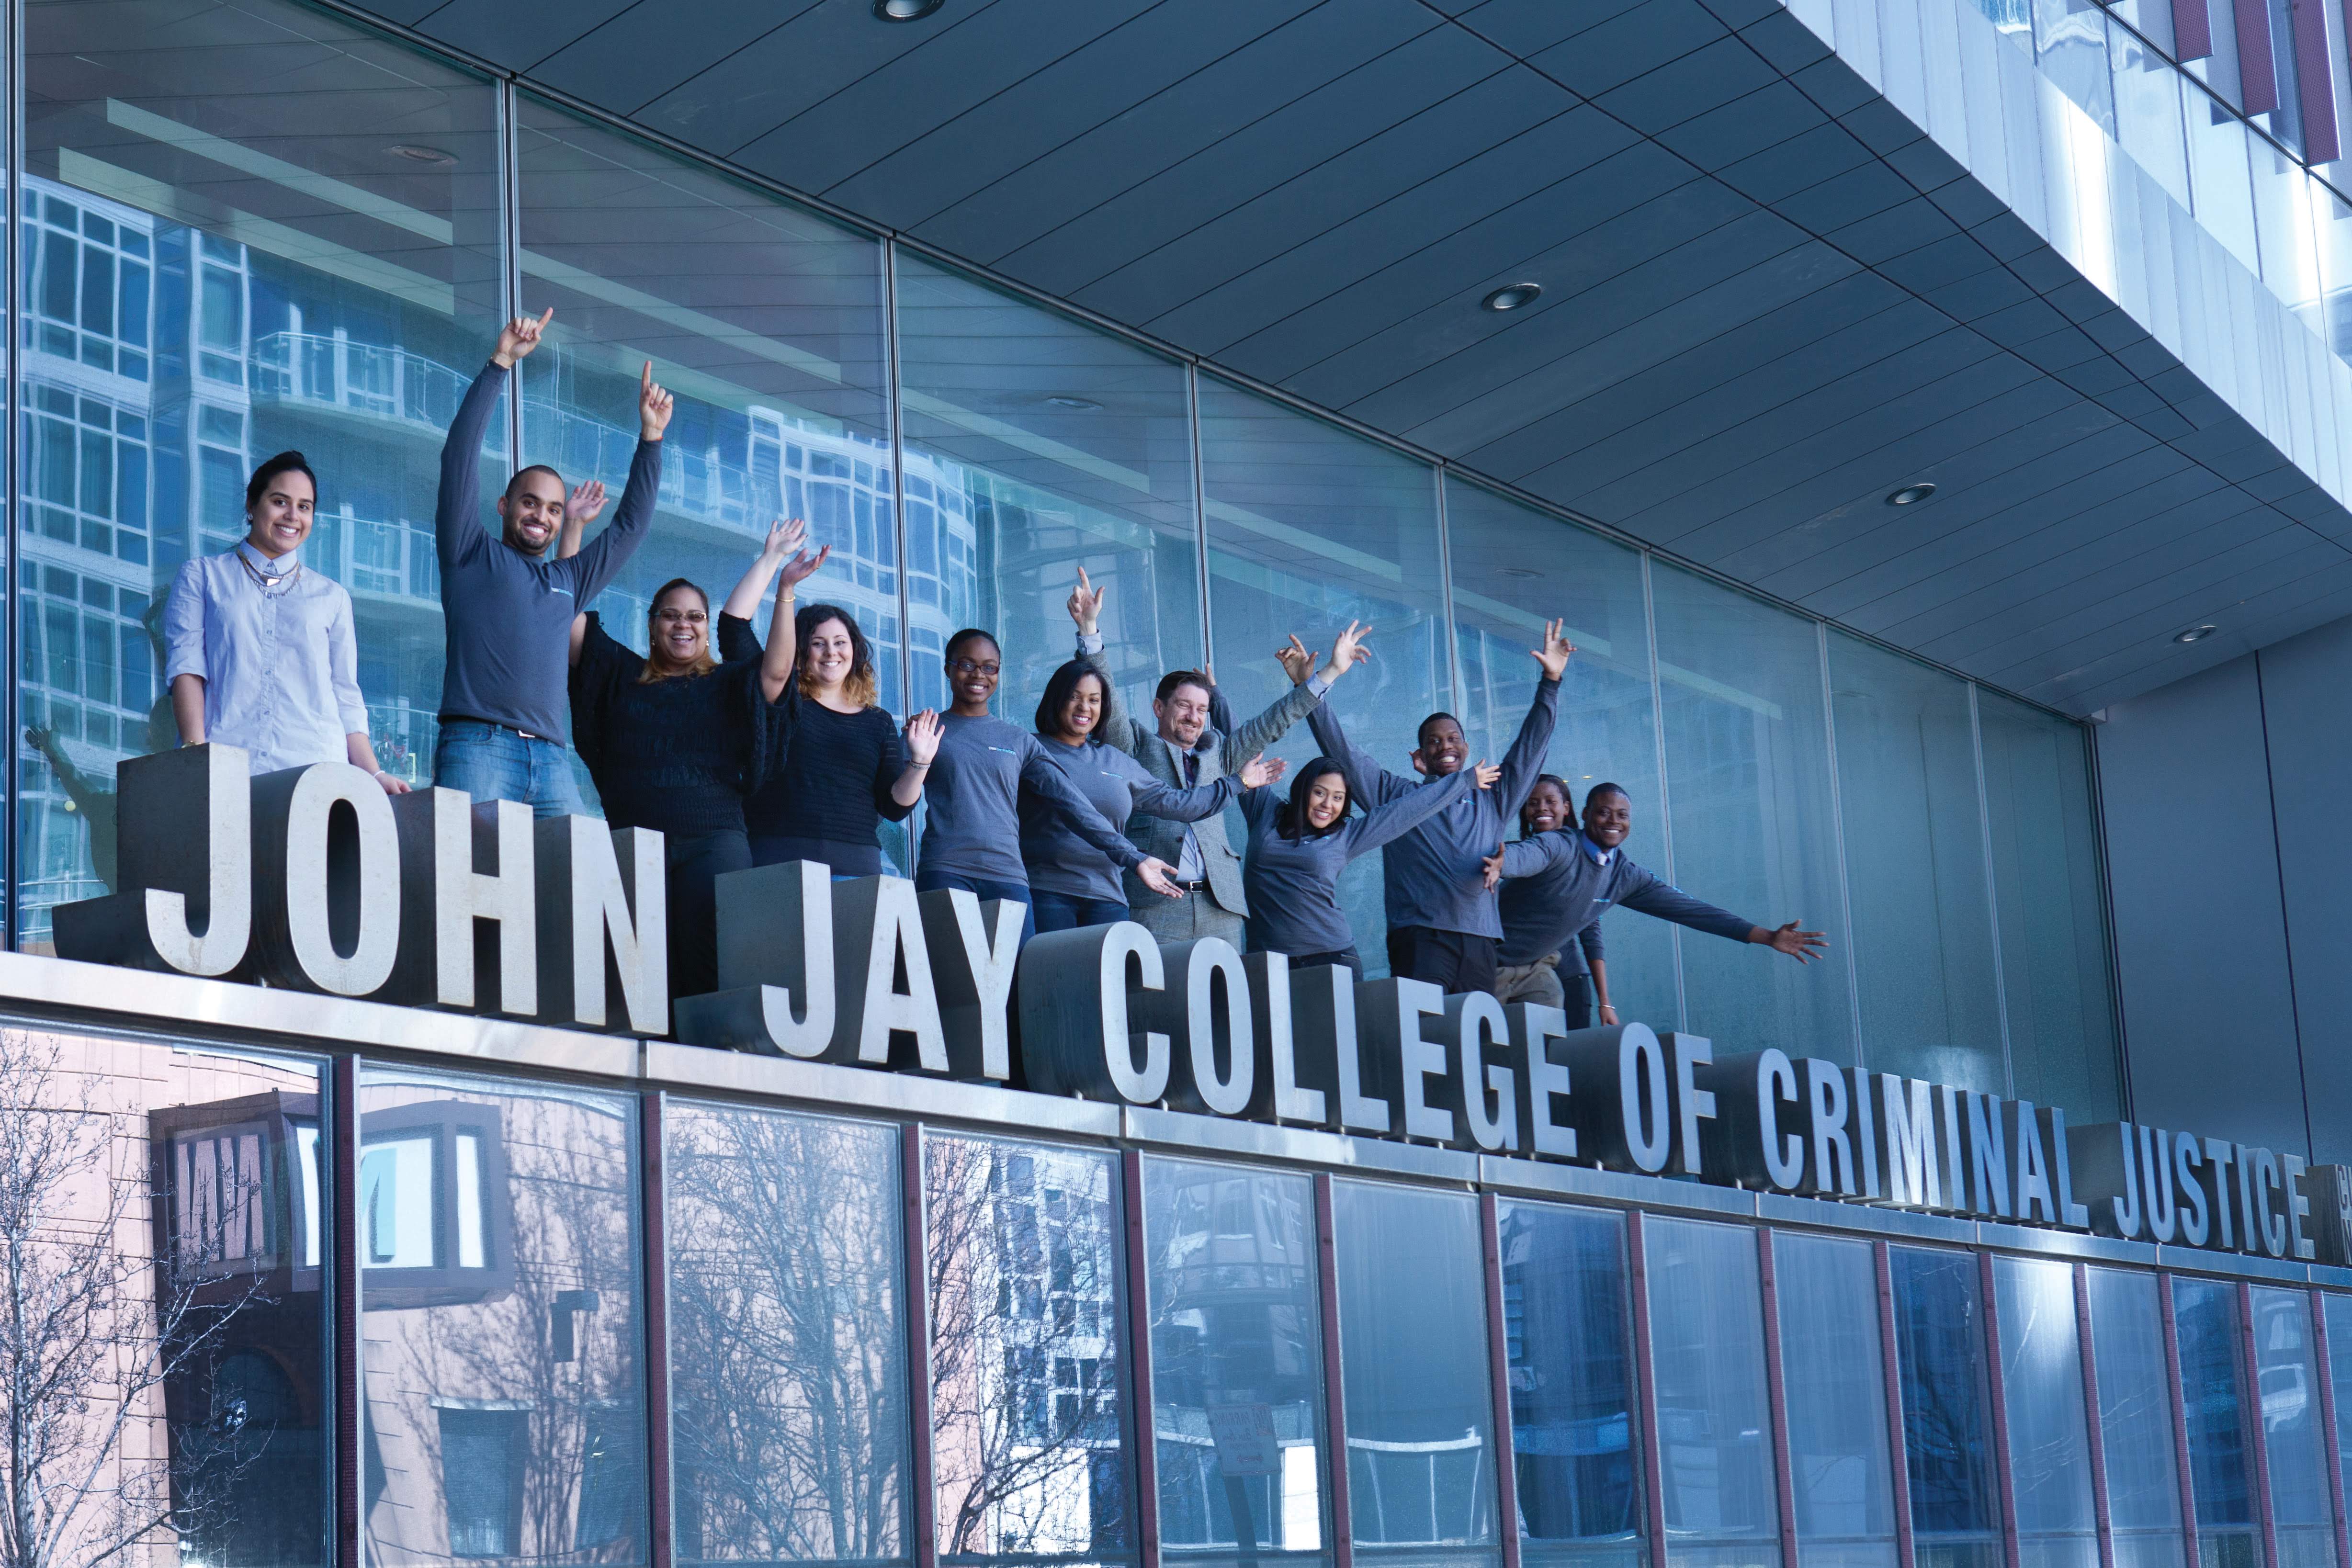 Students posing behind the John Jay College sign